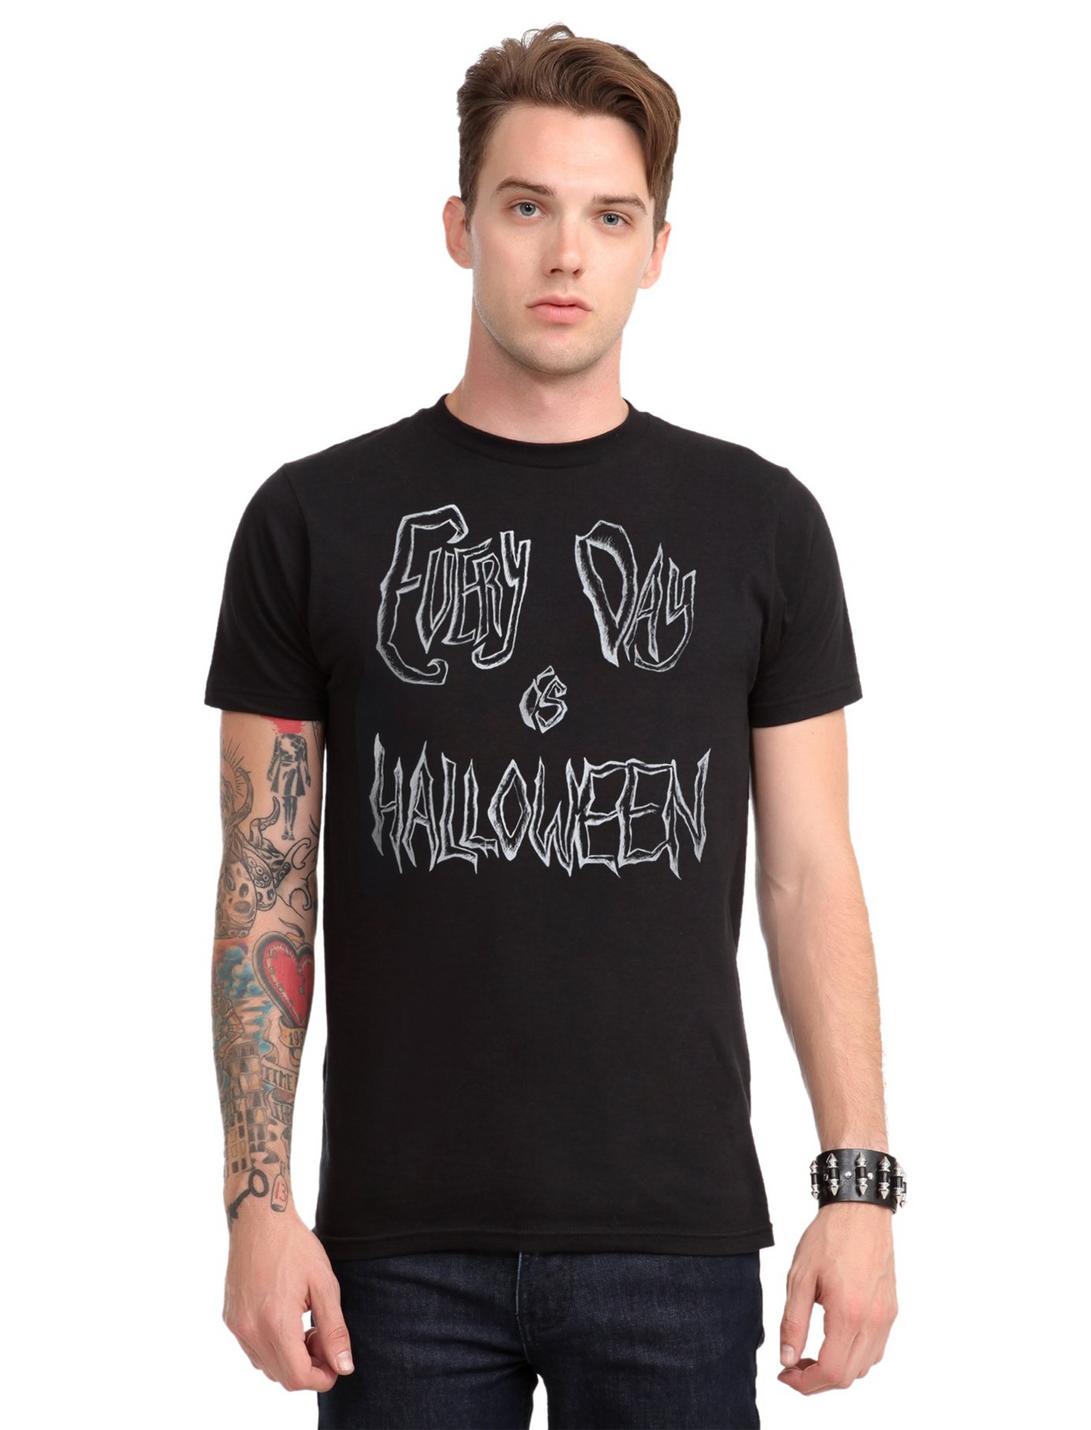 Every Day Is Halloween T-Shirt, , hi-res